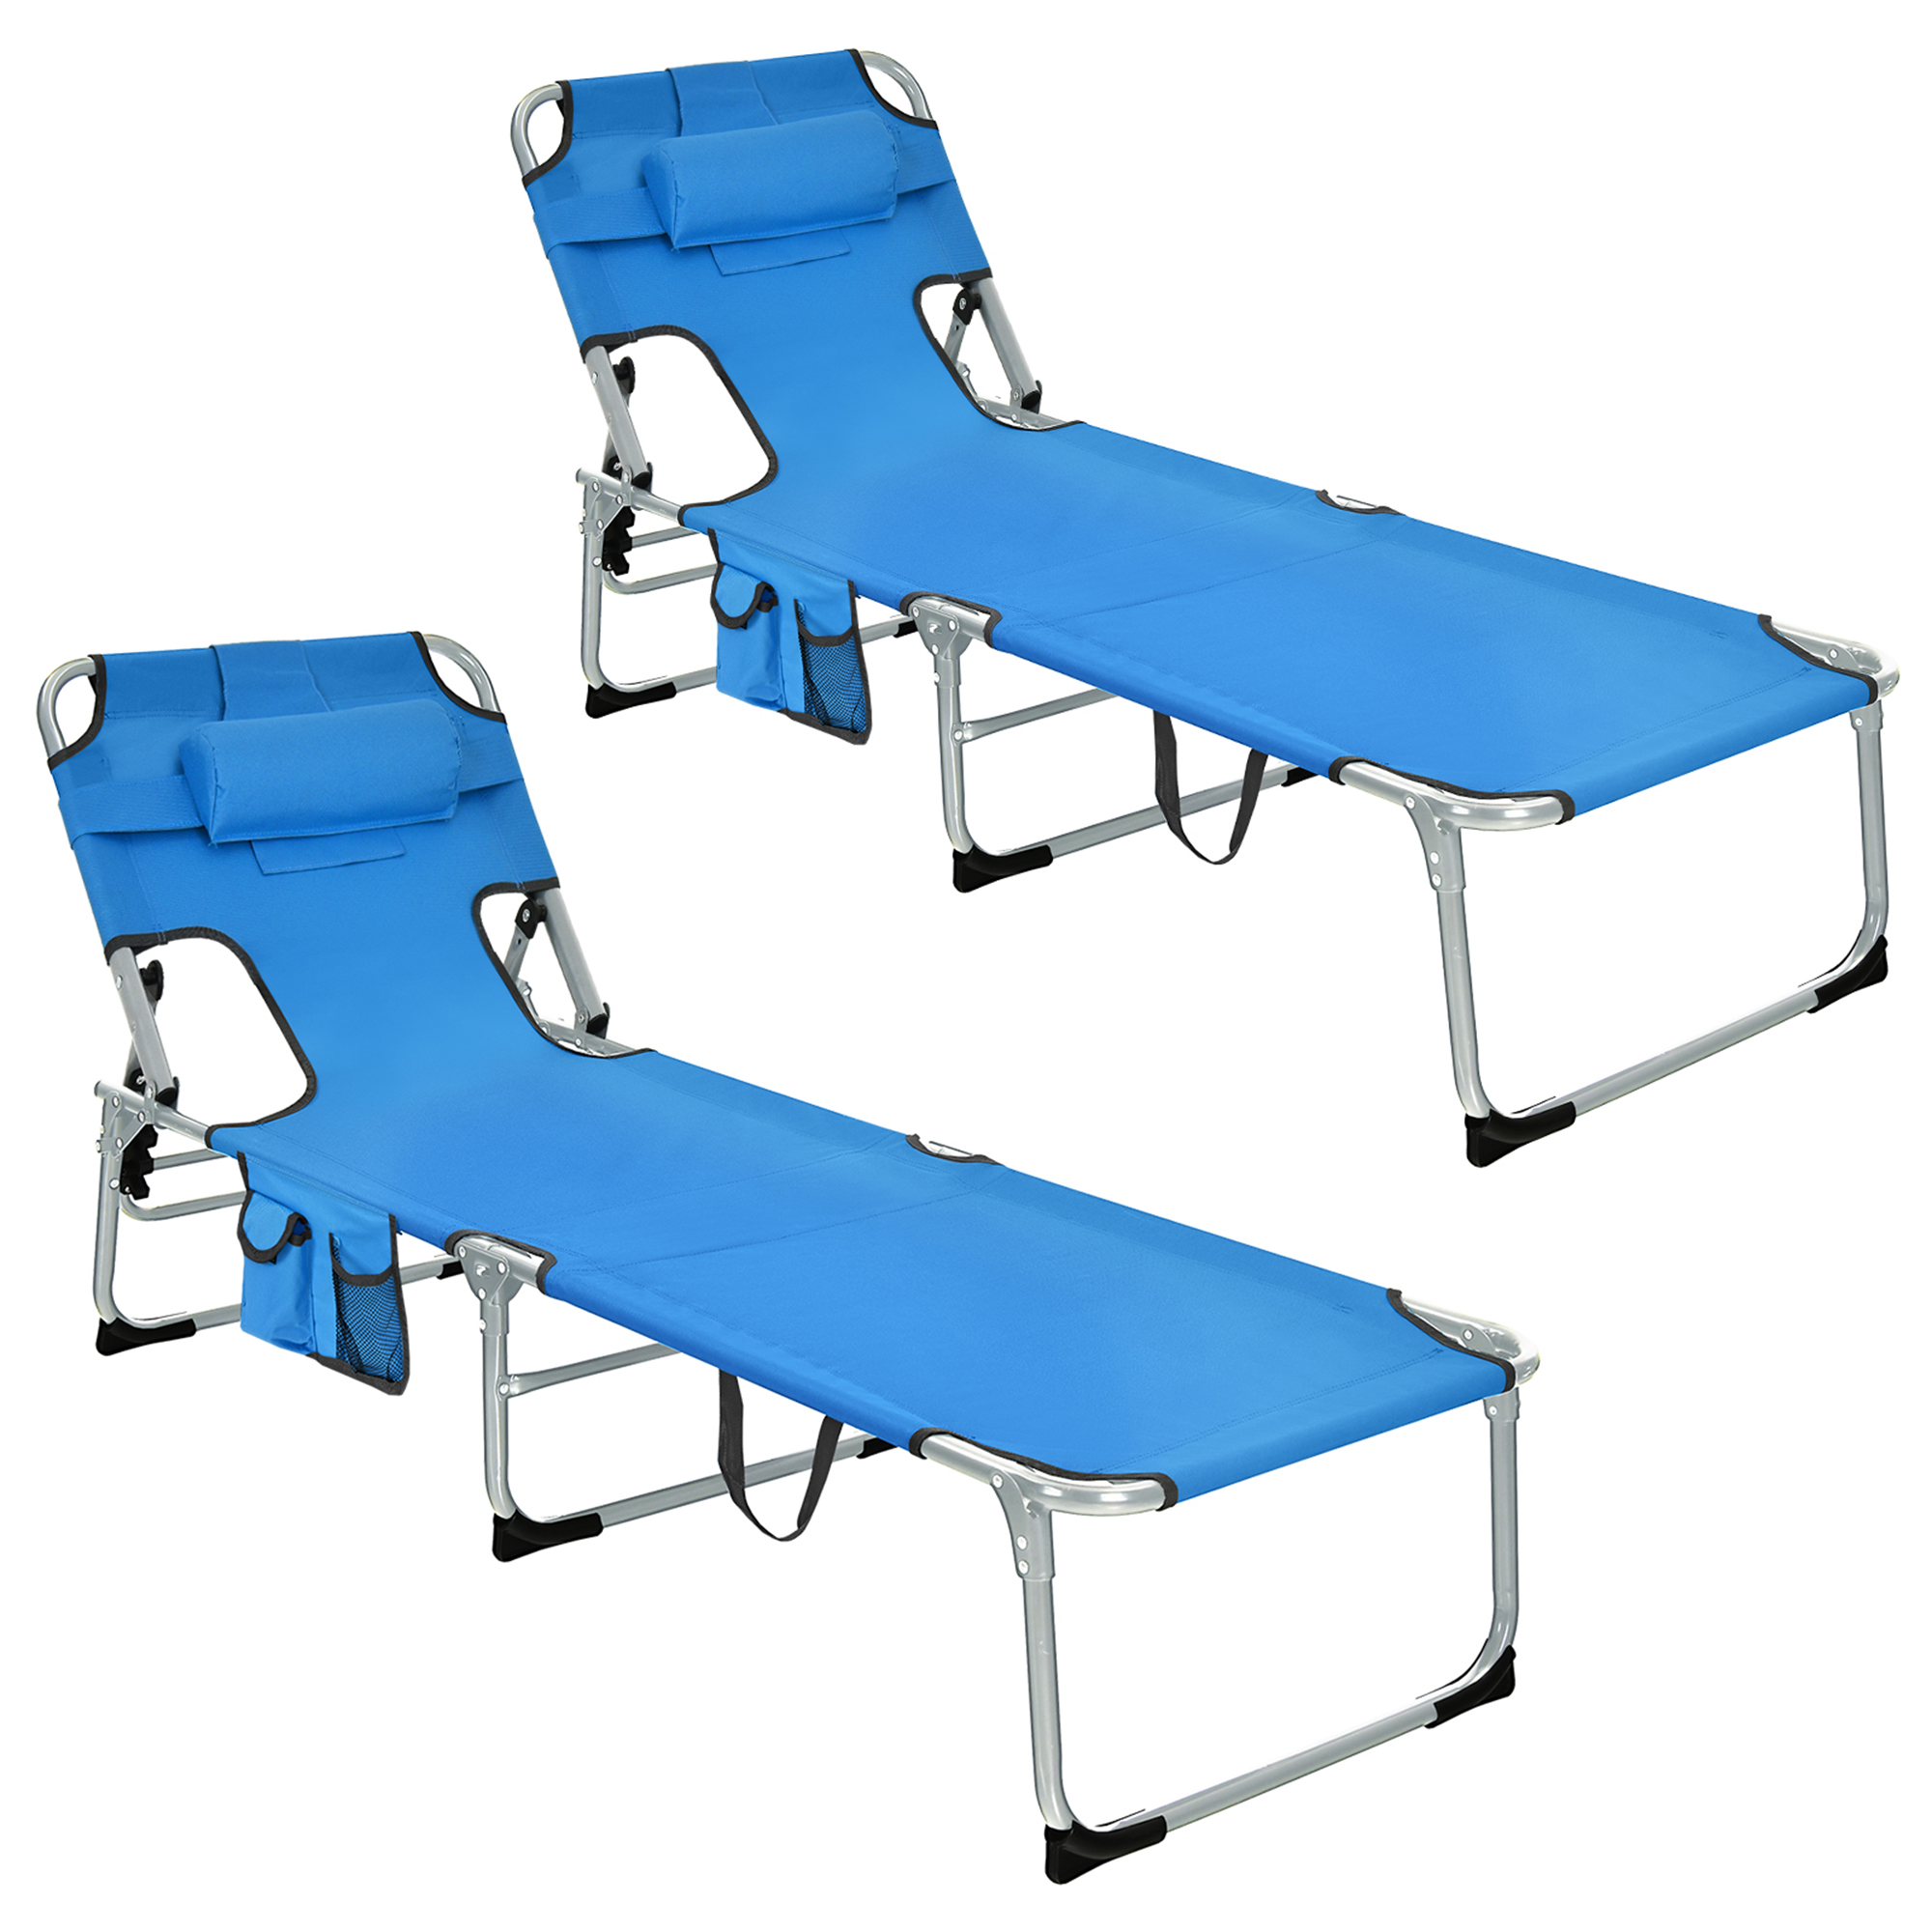 Gymax Set of 2 Beach Chaise Lounge Chair Folding Reclining Chair w/ Facing Hole Blue - image 1 of 10